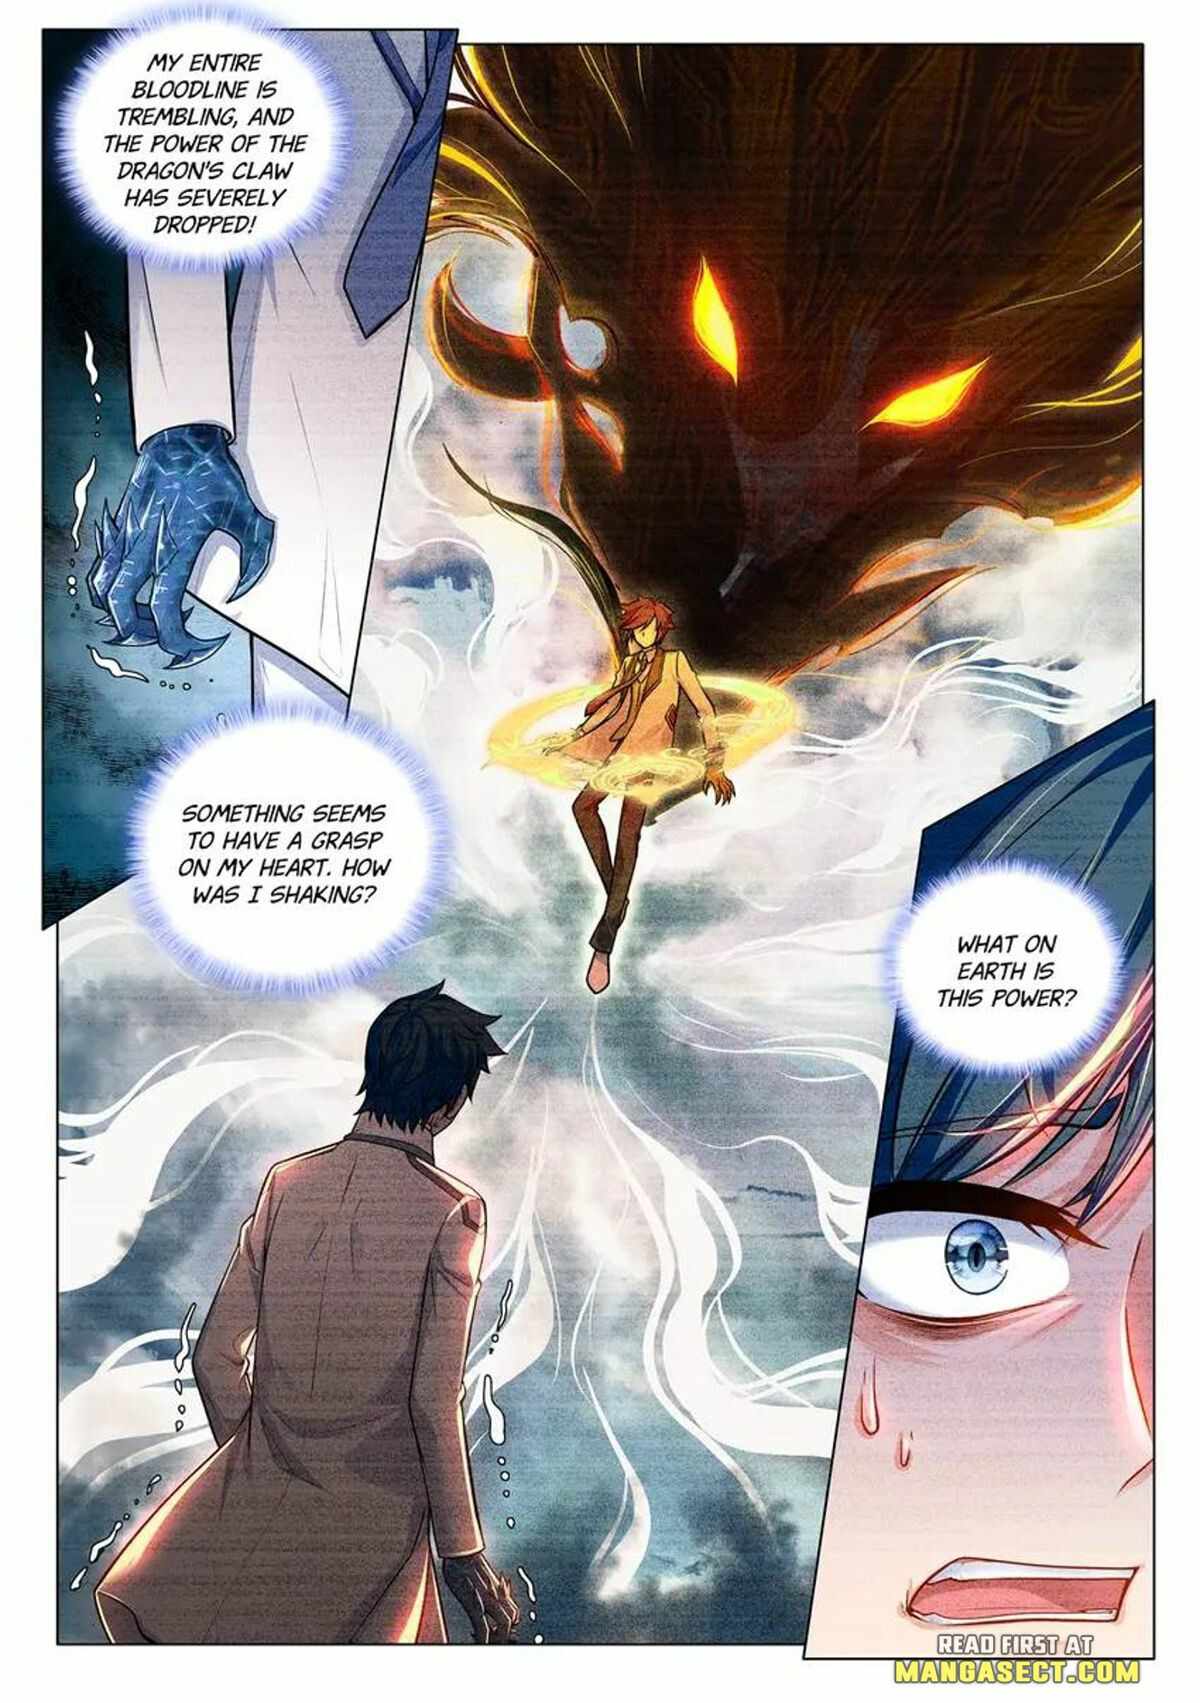 Soul Land III - The Legend of the Dragon King Chapter 432-eng-li - Page 4